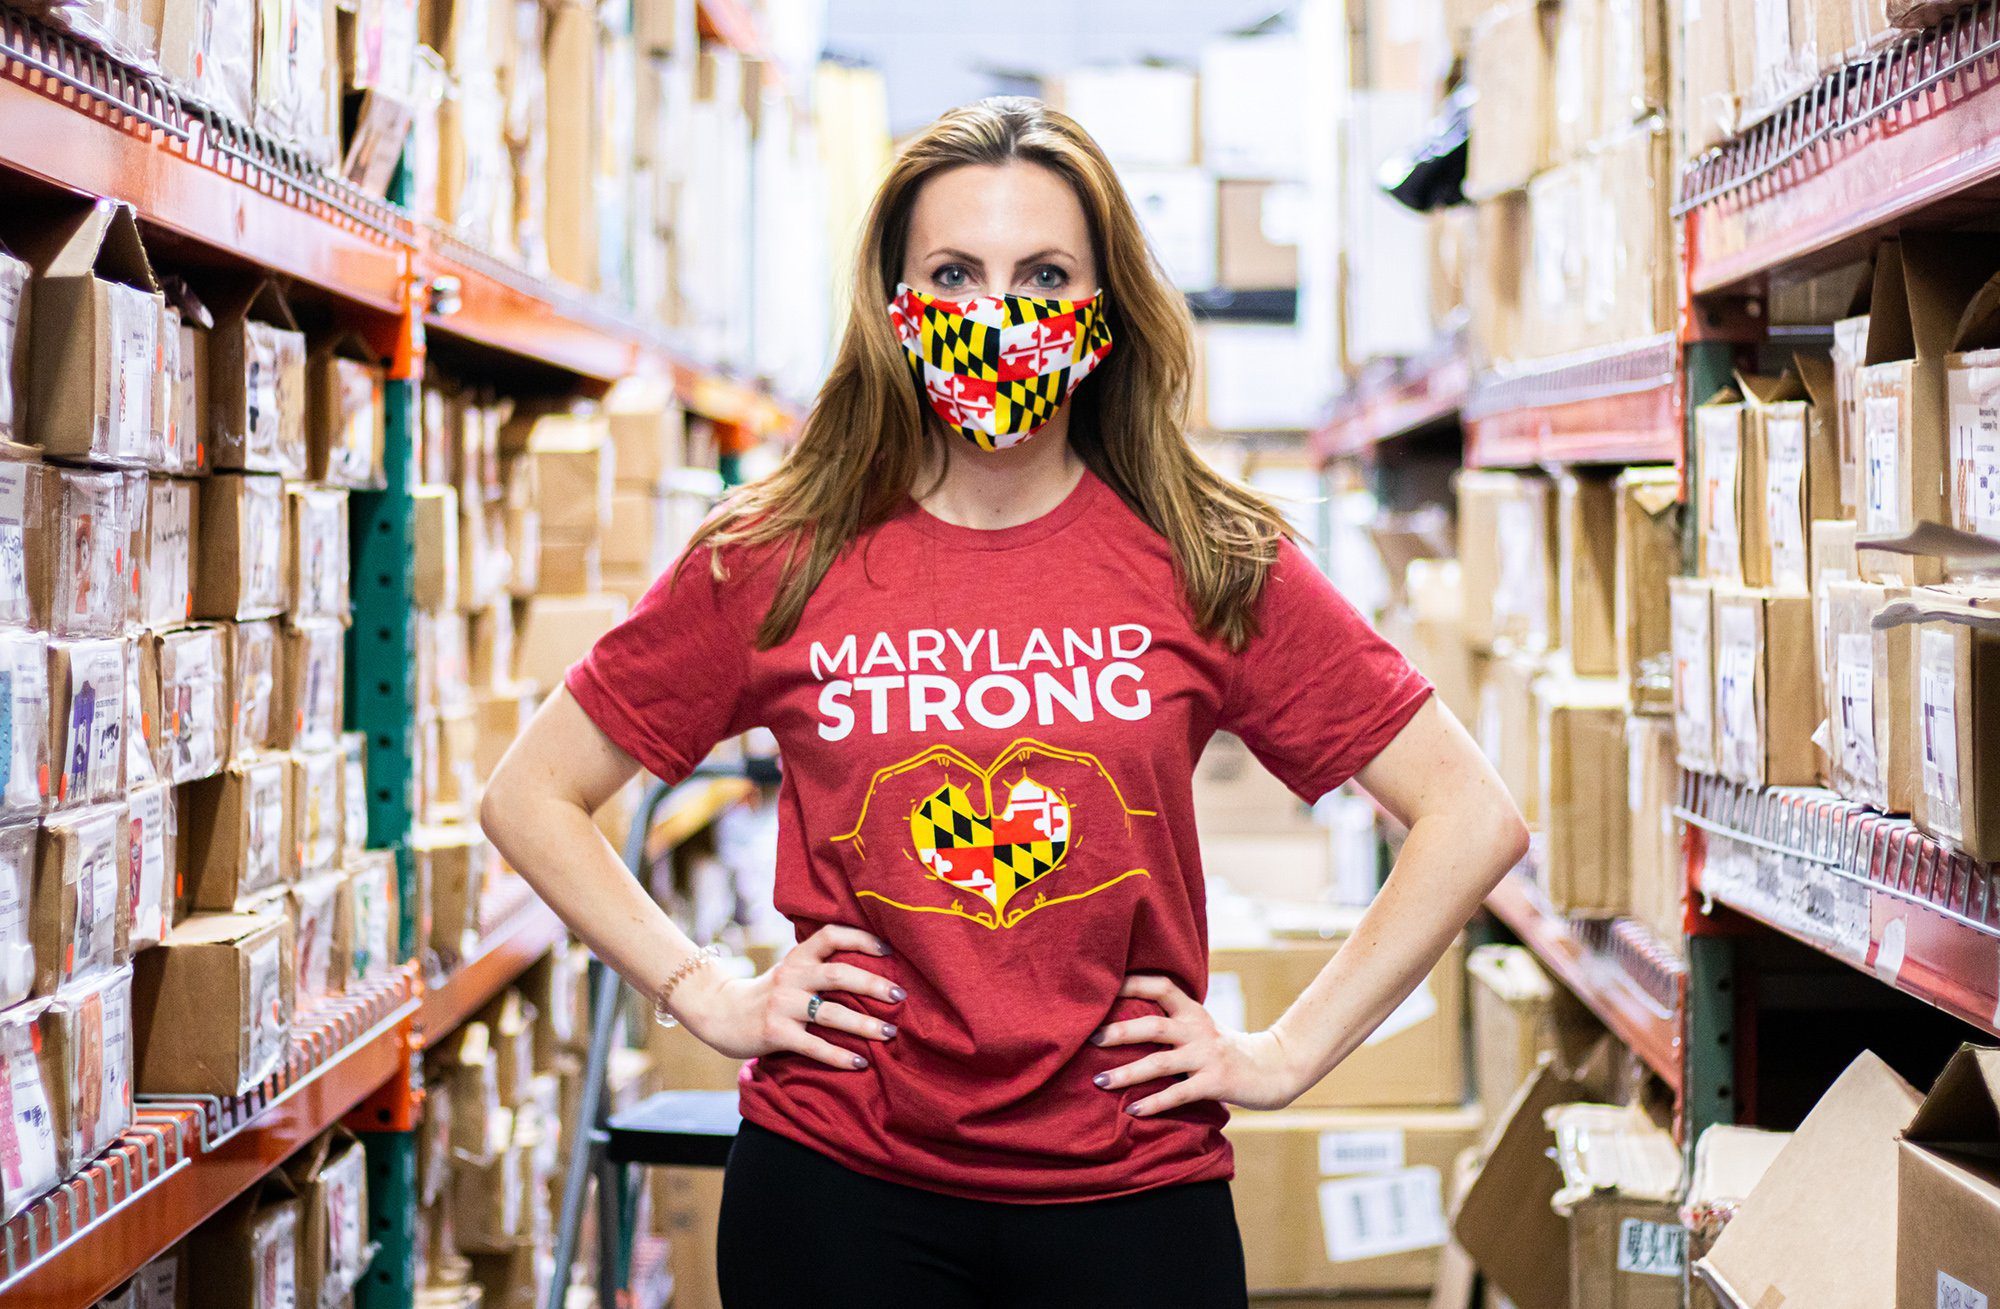 Von Paris is wearing a Maryland Strong shirt and mask, part of Route One Apparel’s coronavirus pandemic-inspired line